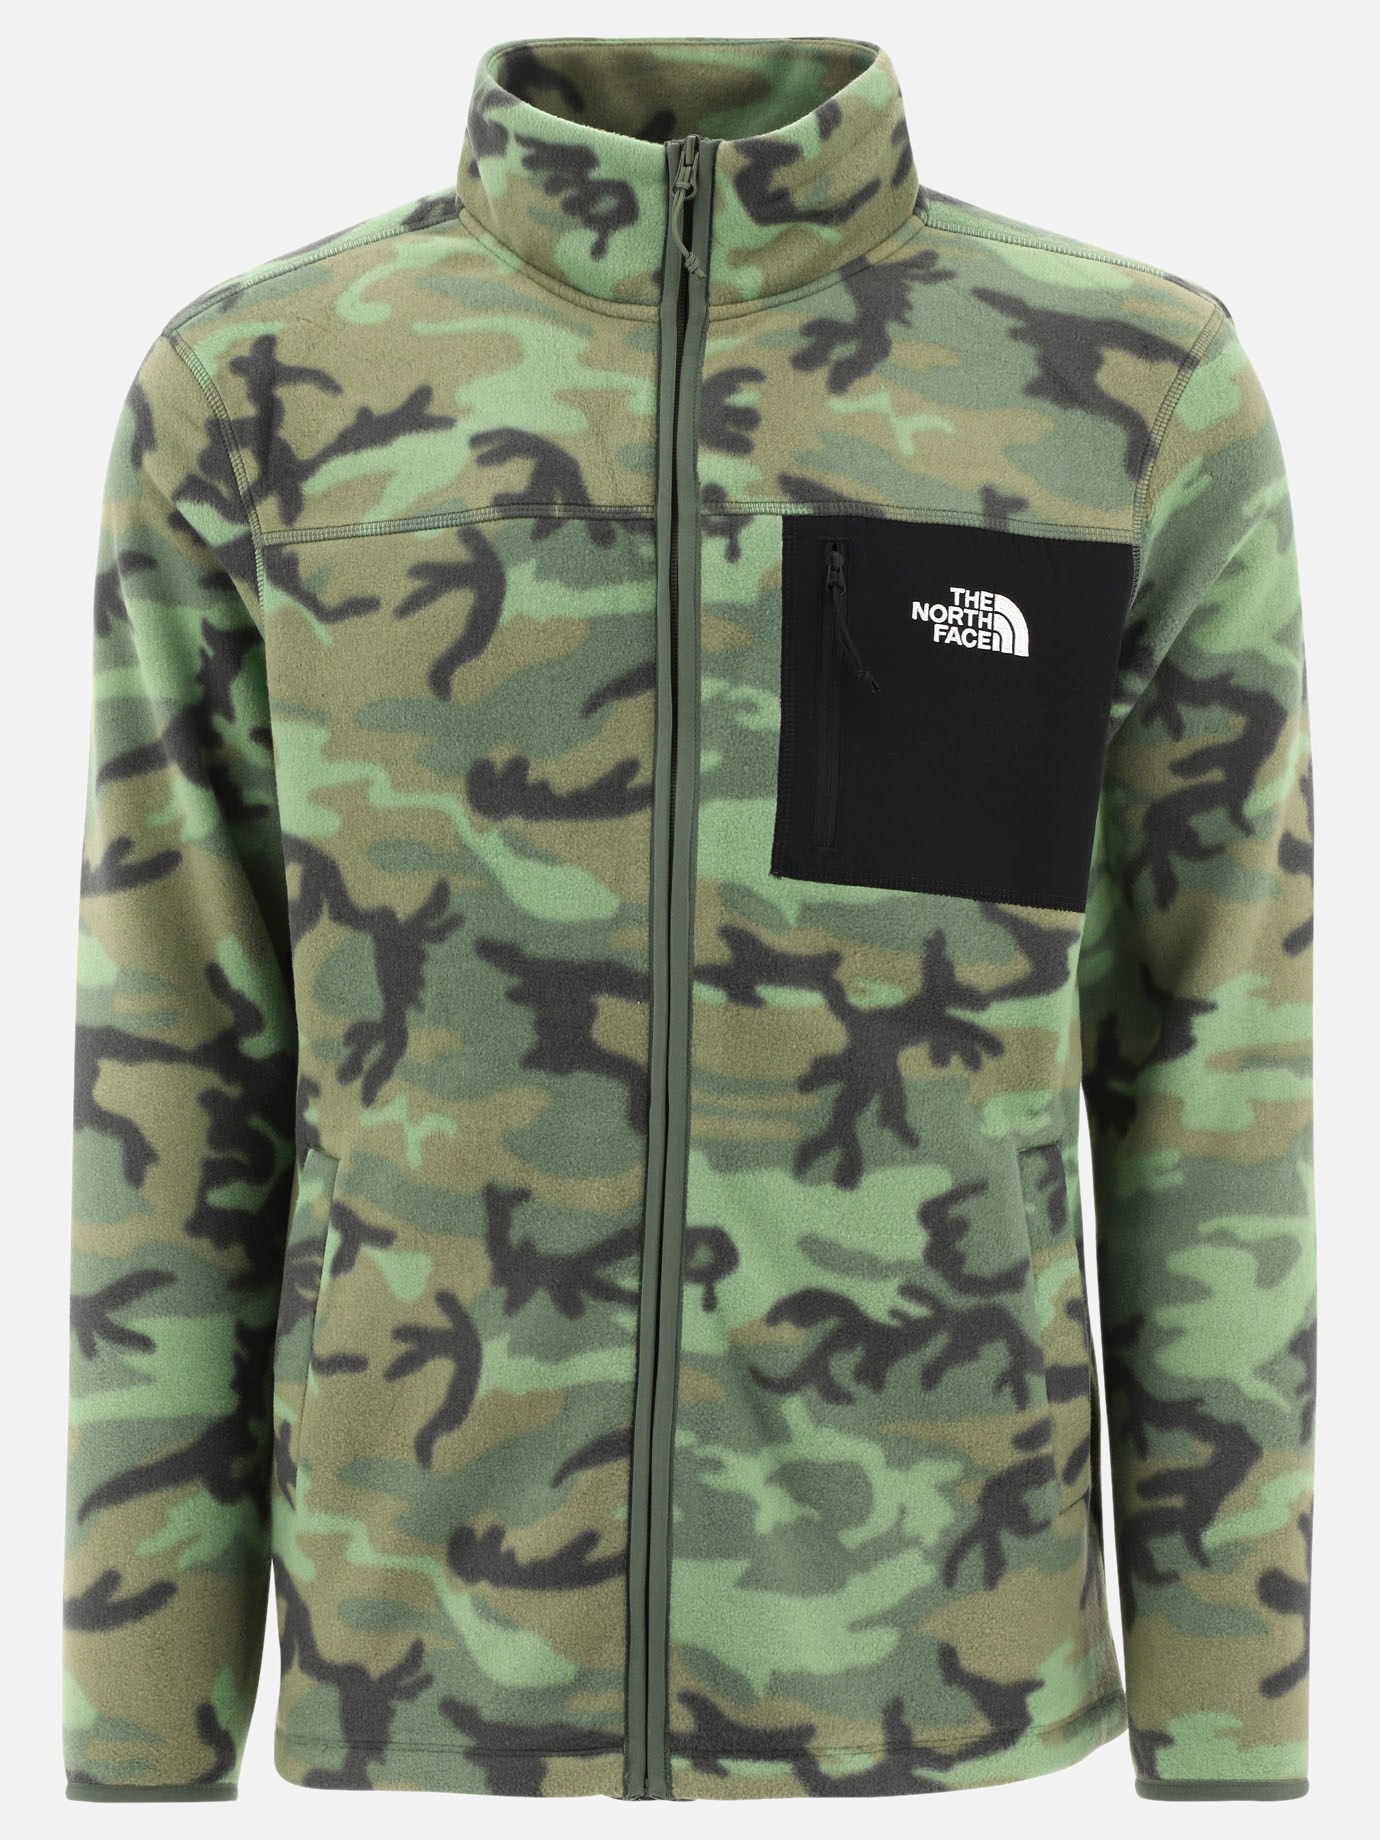  Homesafe  fleece jacket by The North Face